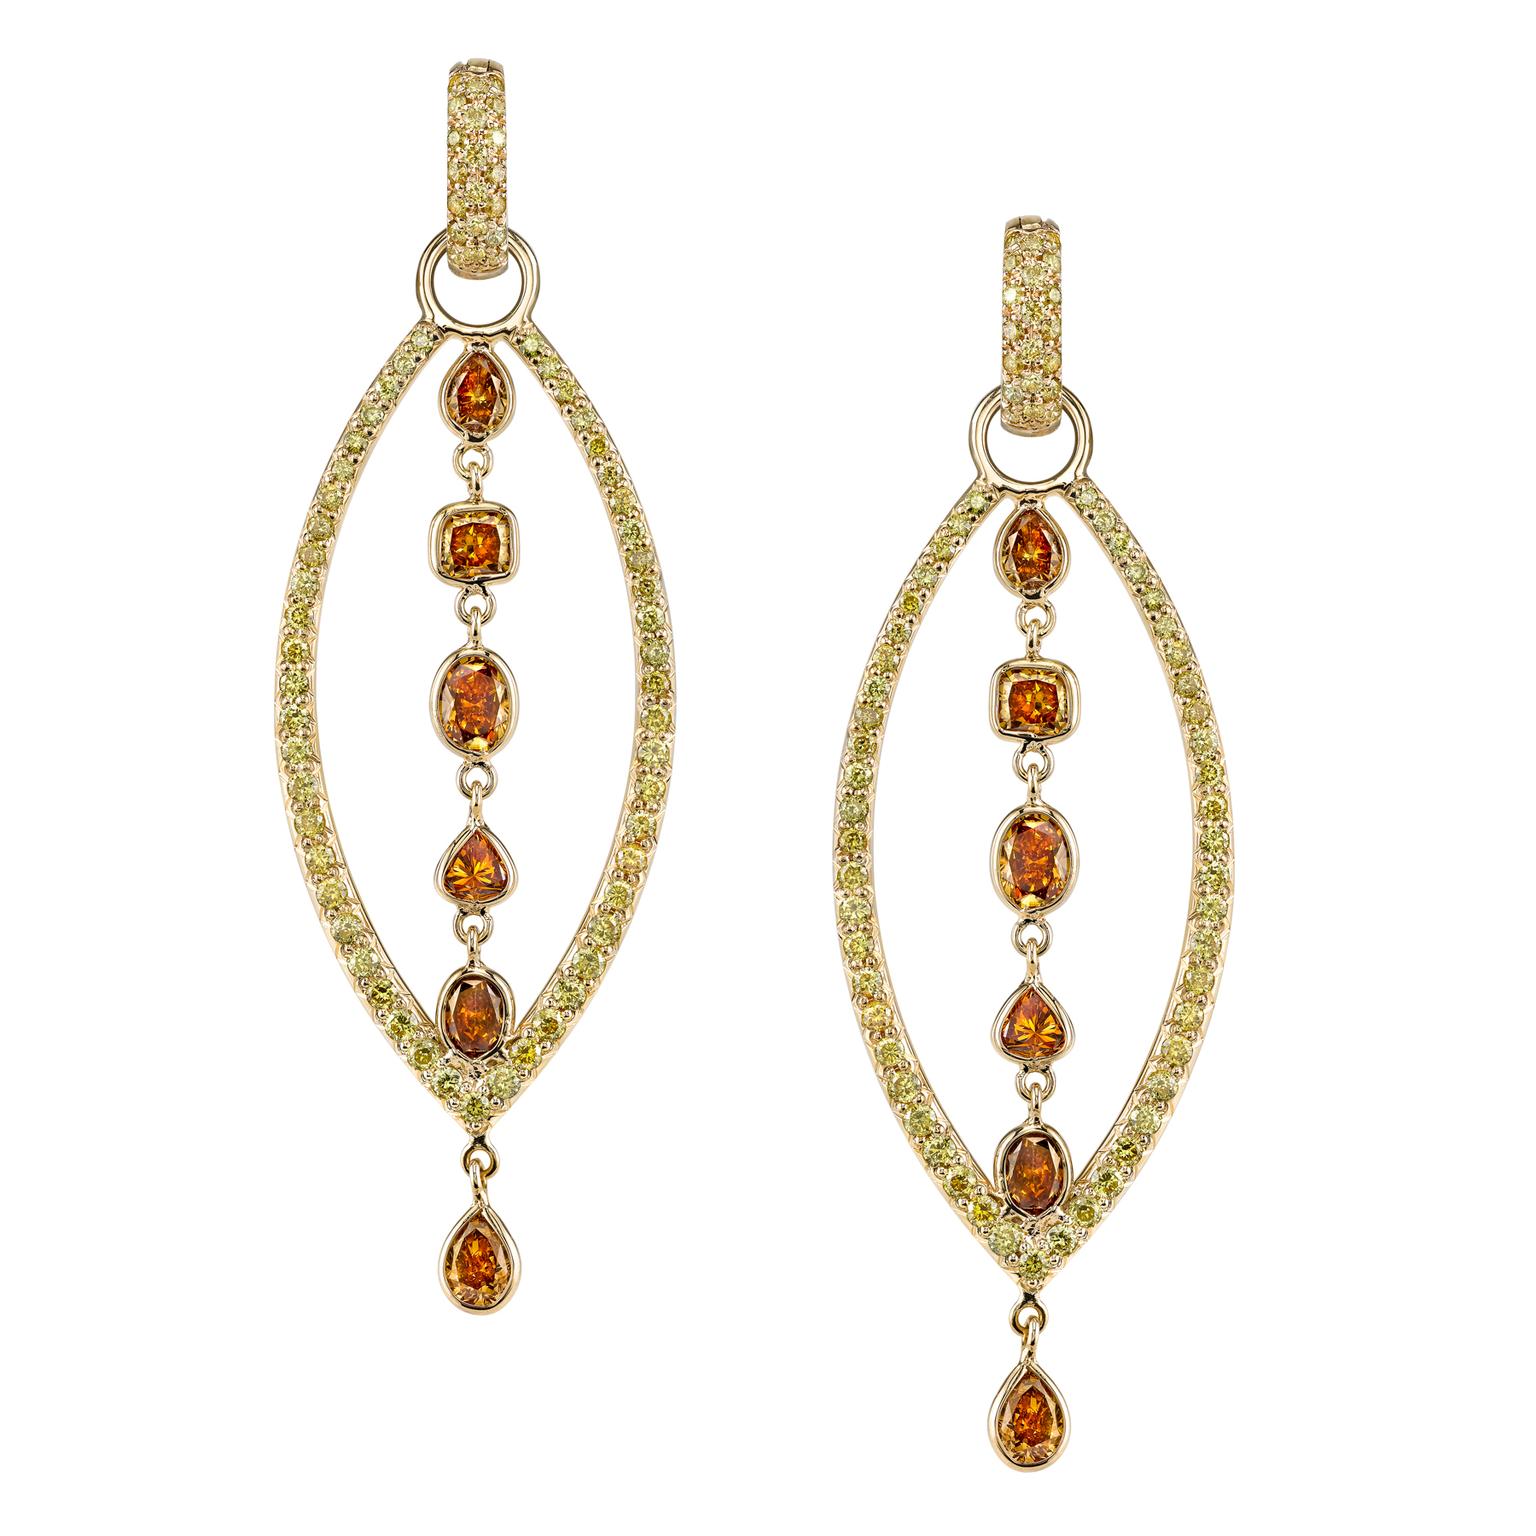 Erica Courtney Cleopatra Queen of the Nile diamond earrings